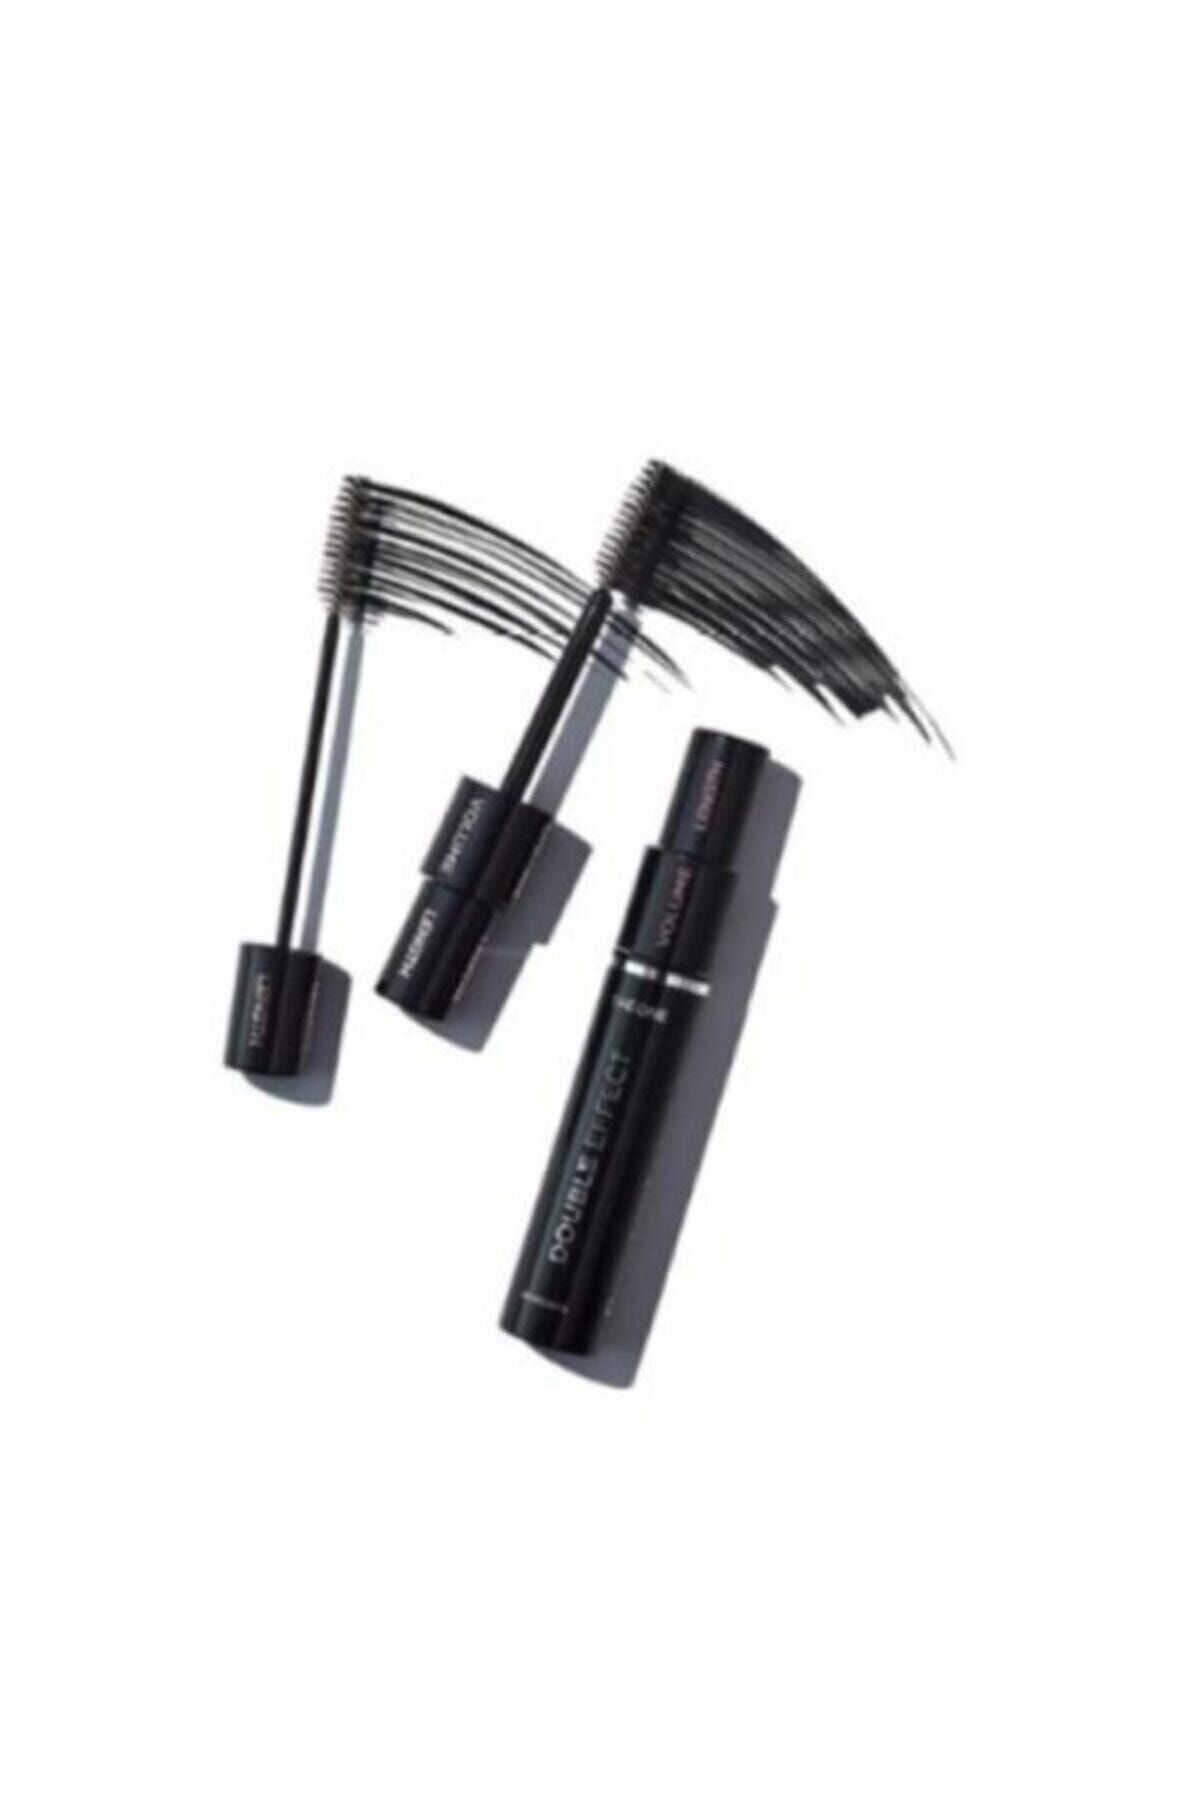 Oriflame The One Double Effect Mascara